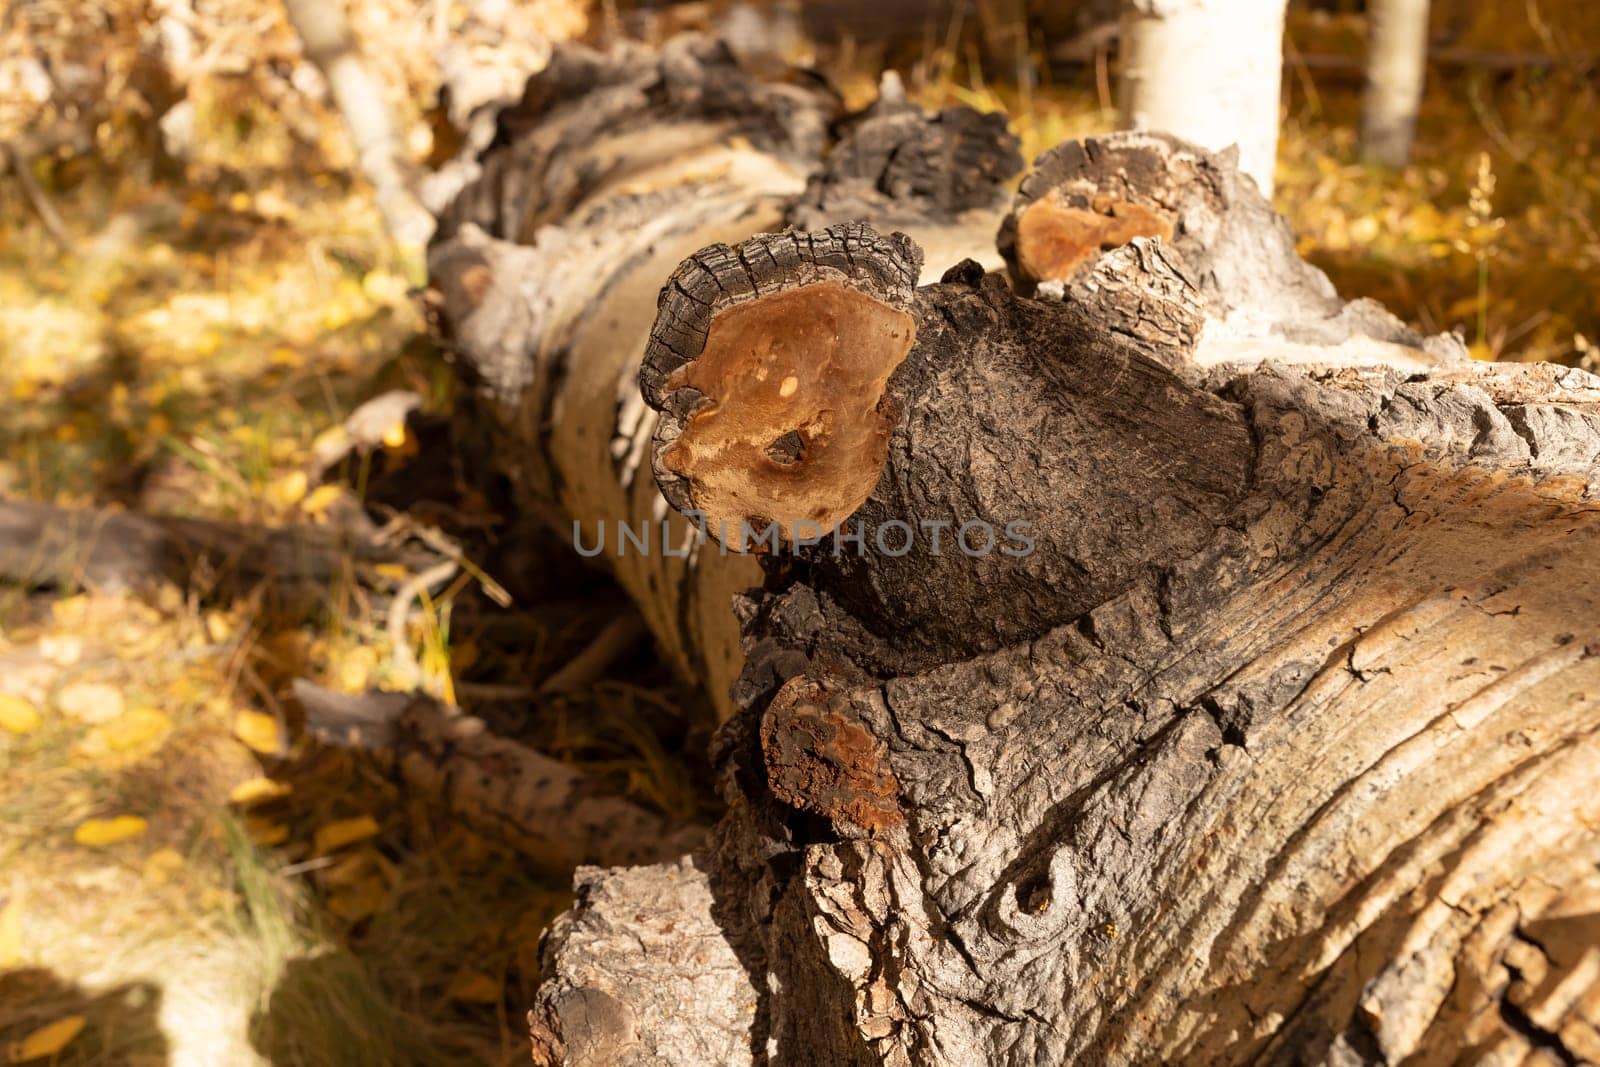 Closeup Inonotus Obliquus Called Chaga, Brown Parasitic Fungus On Tree In Forest. Healing Wild Mushroom Boosting Immune System, Fighting Cancer, Lowering Cholesterol. Healthy Pure Natural. Horizontal.